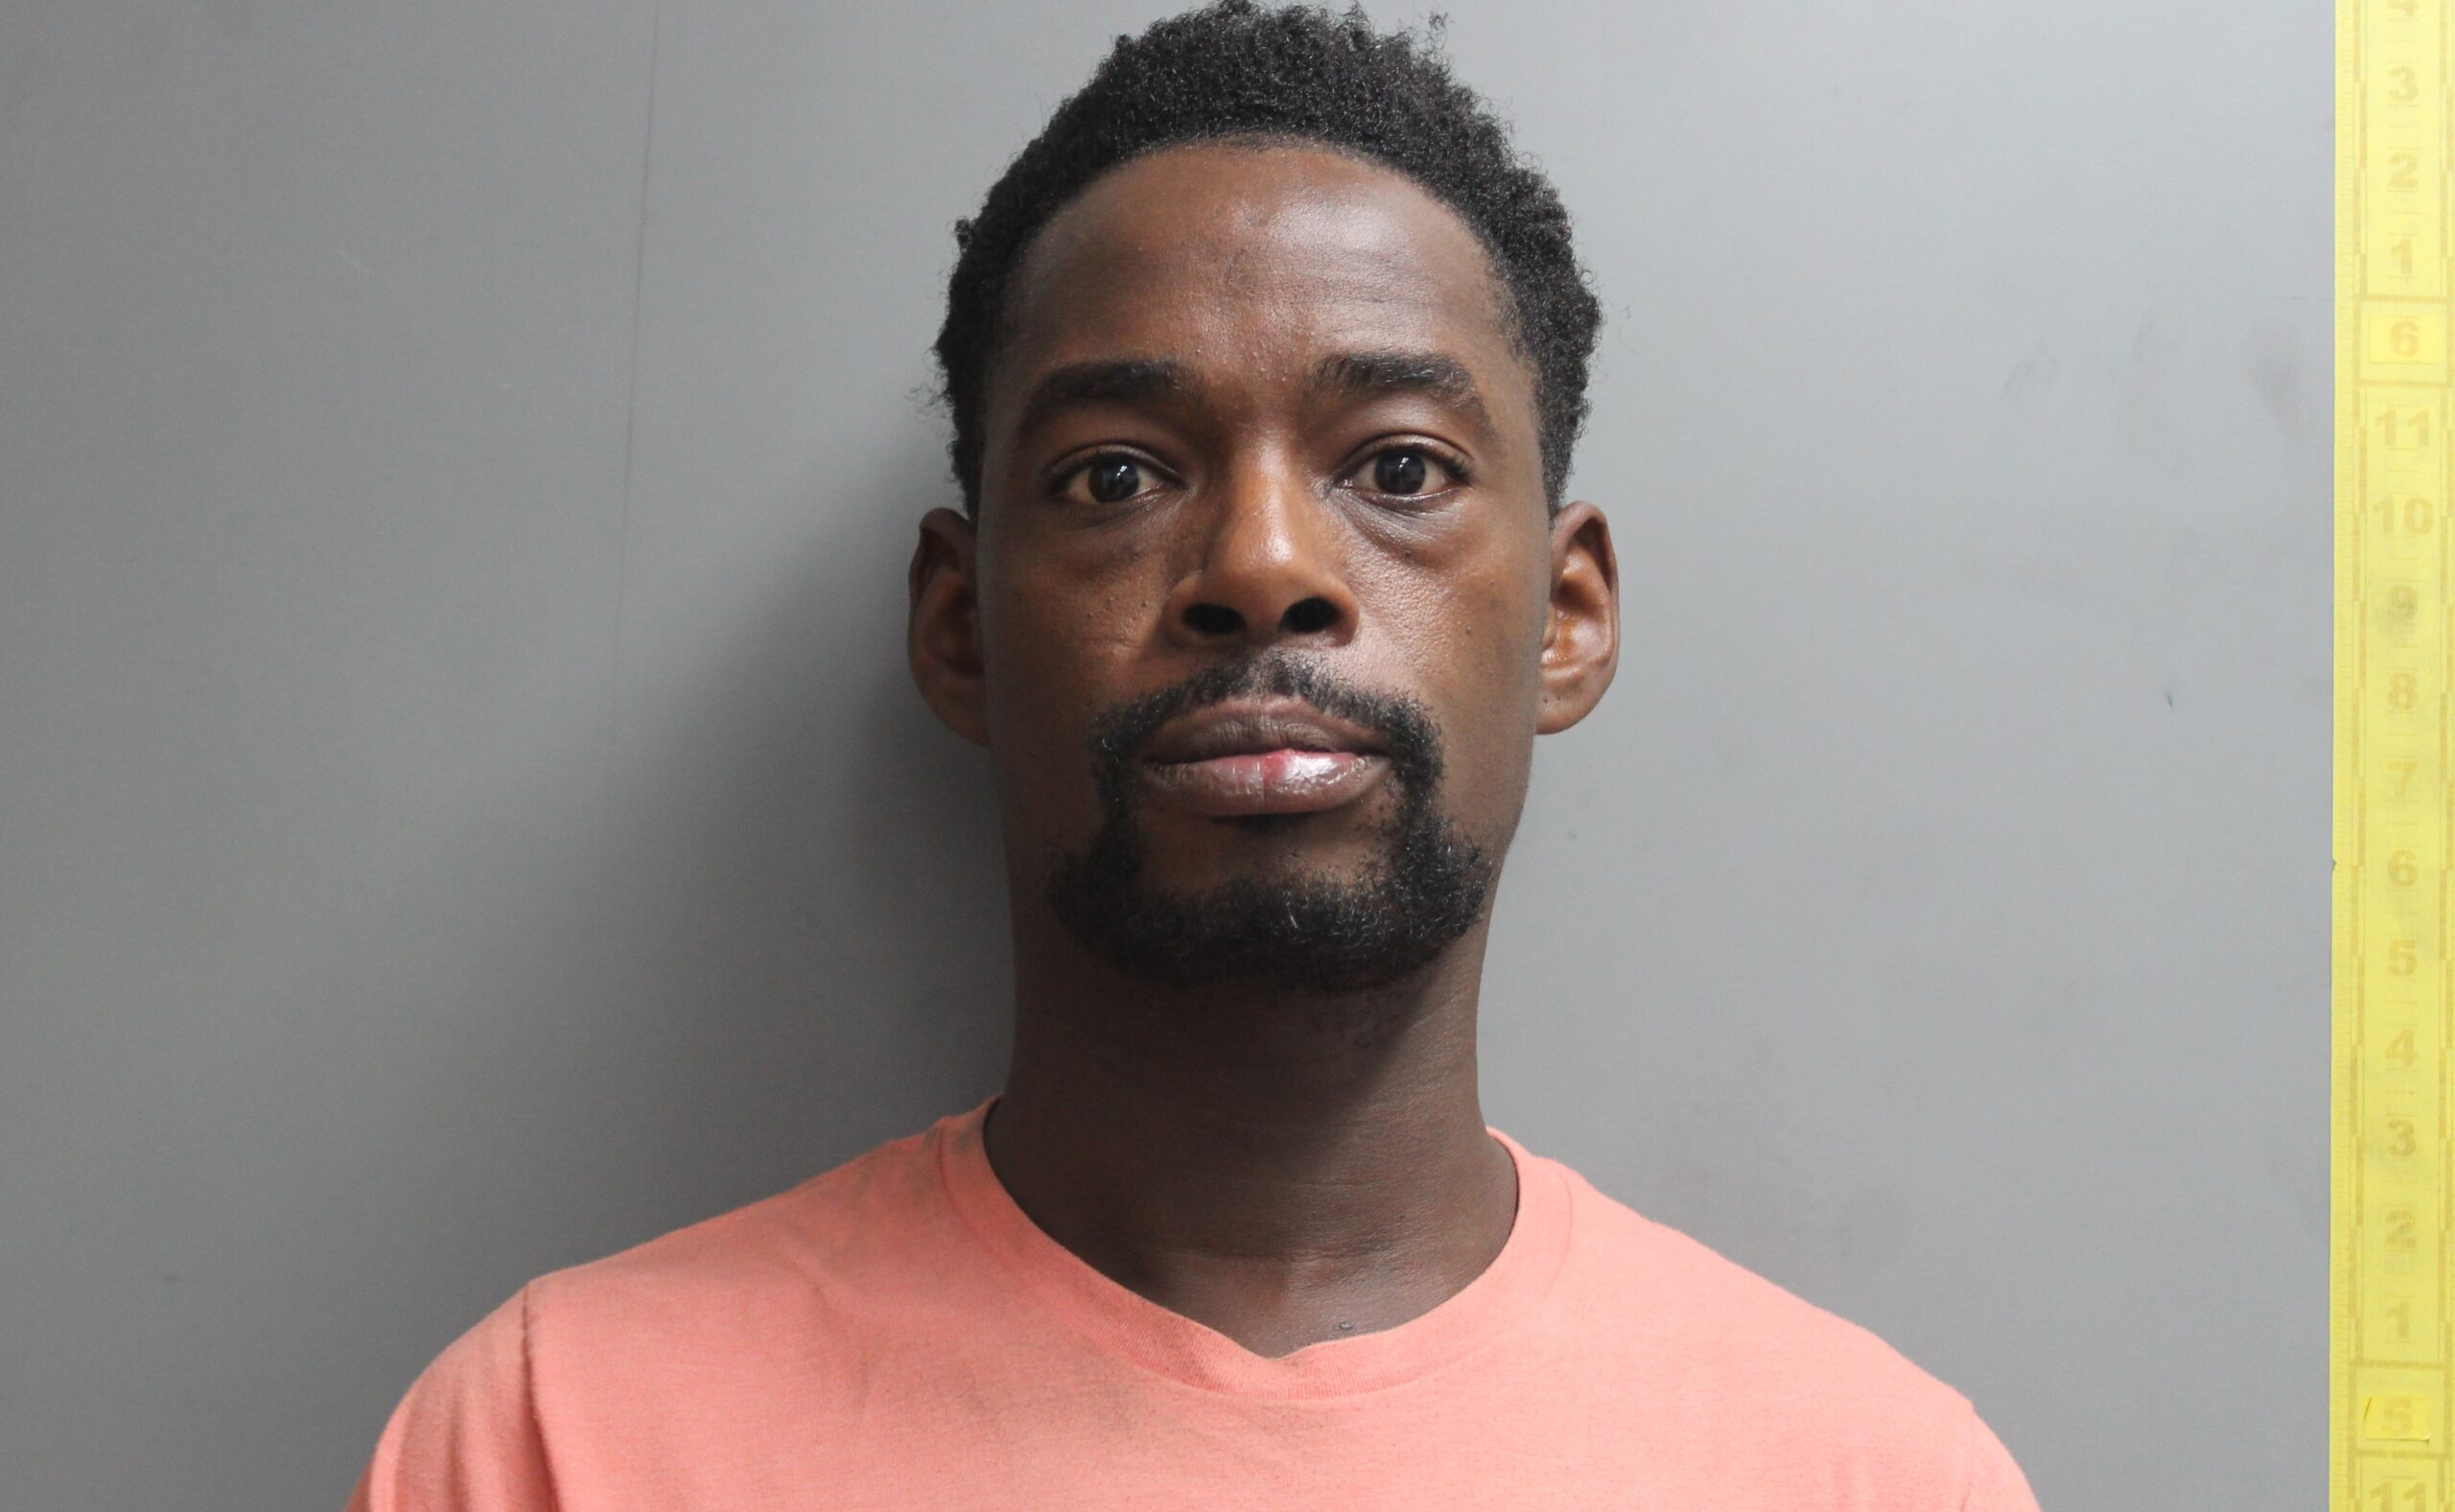 Lover's Tiff Turns Violent For 2 Men At Posh St. Croix Condo Friday Night: VIPD